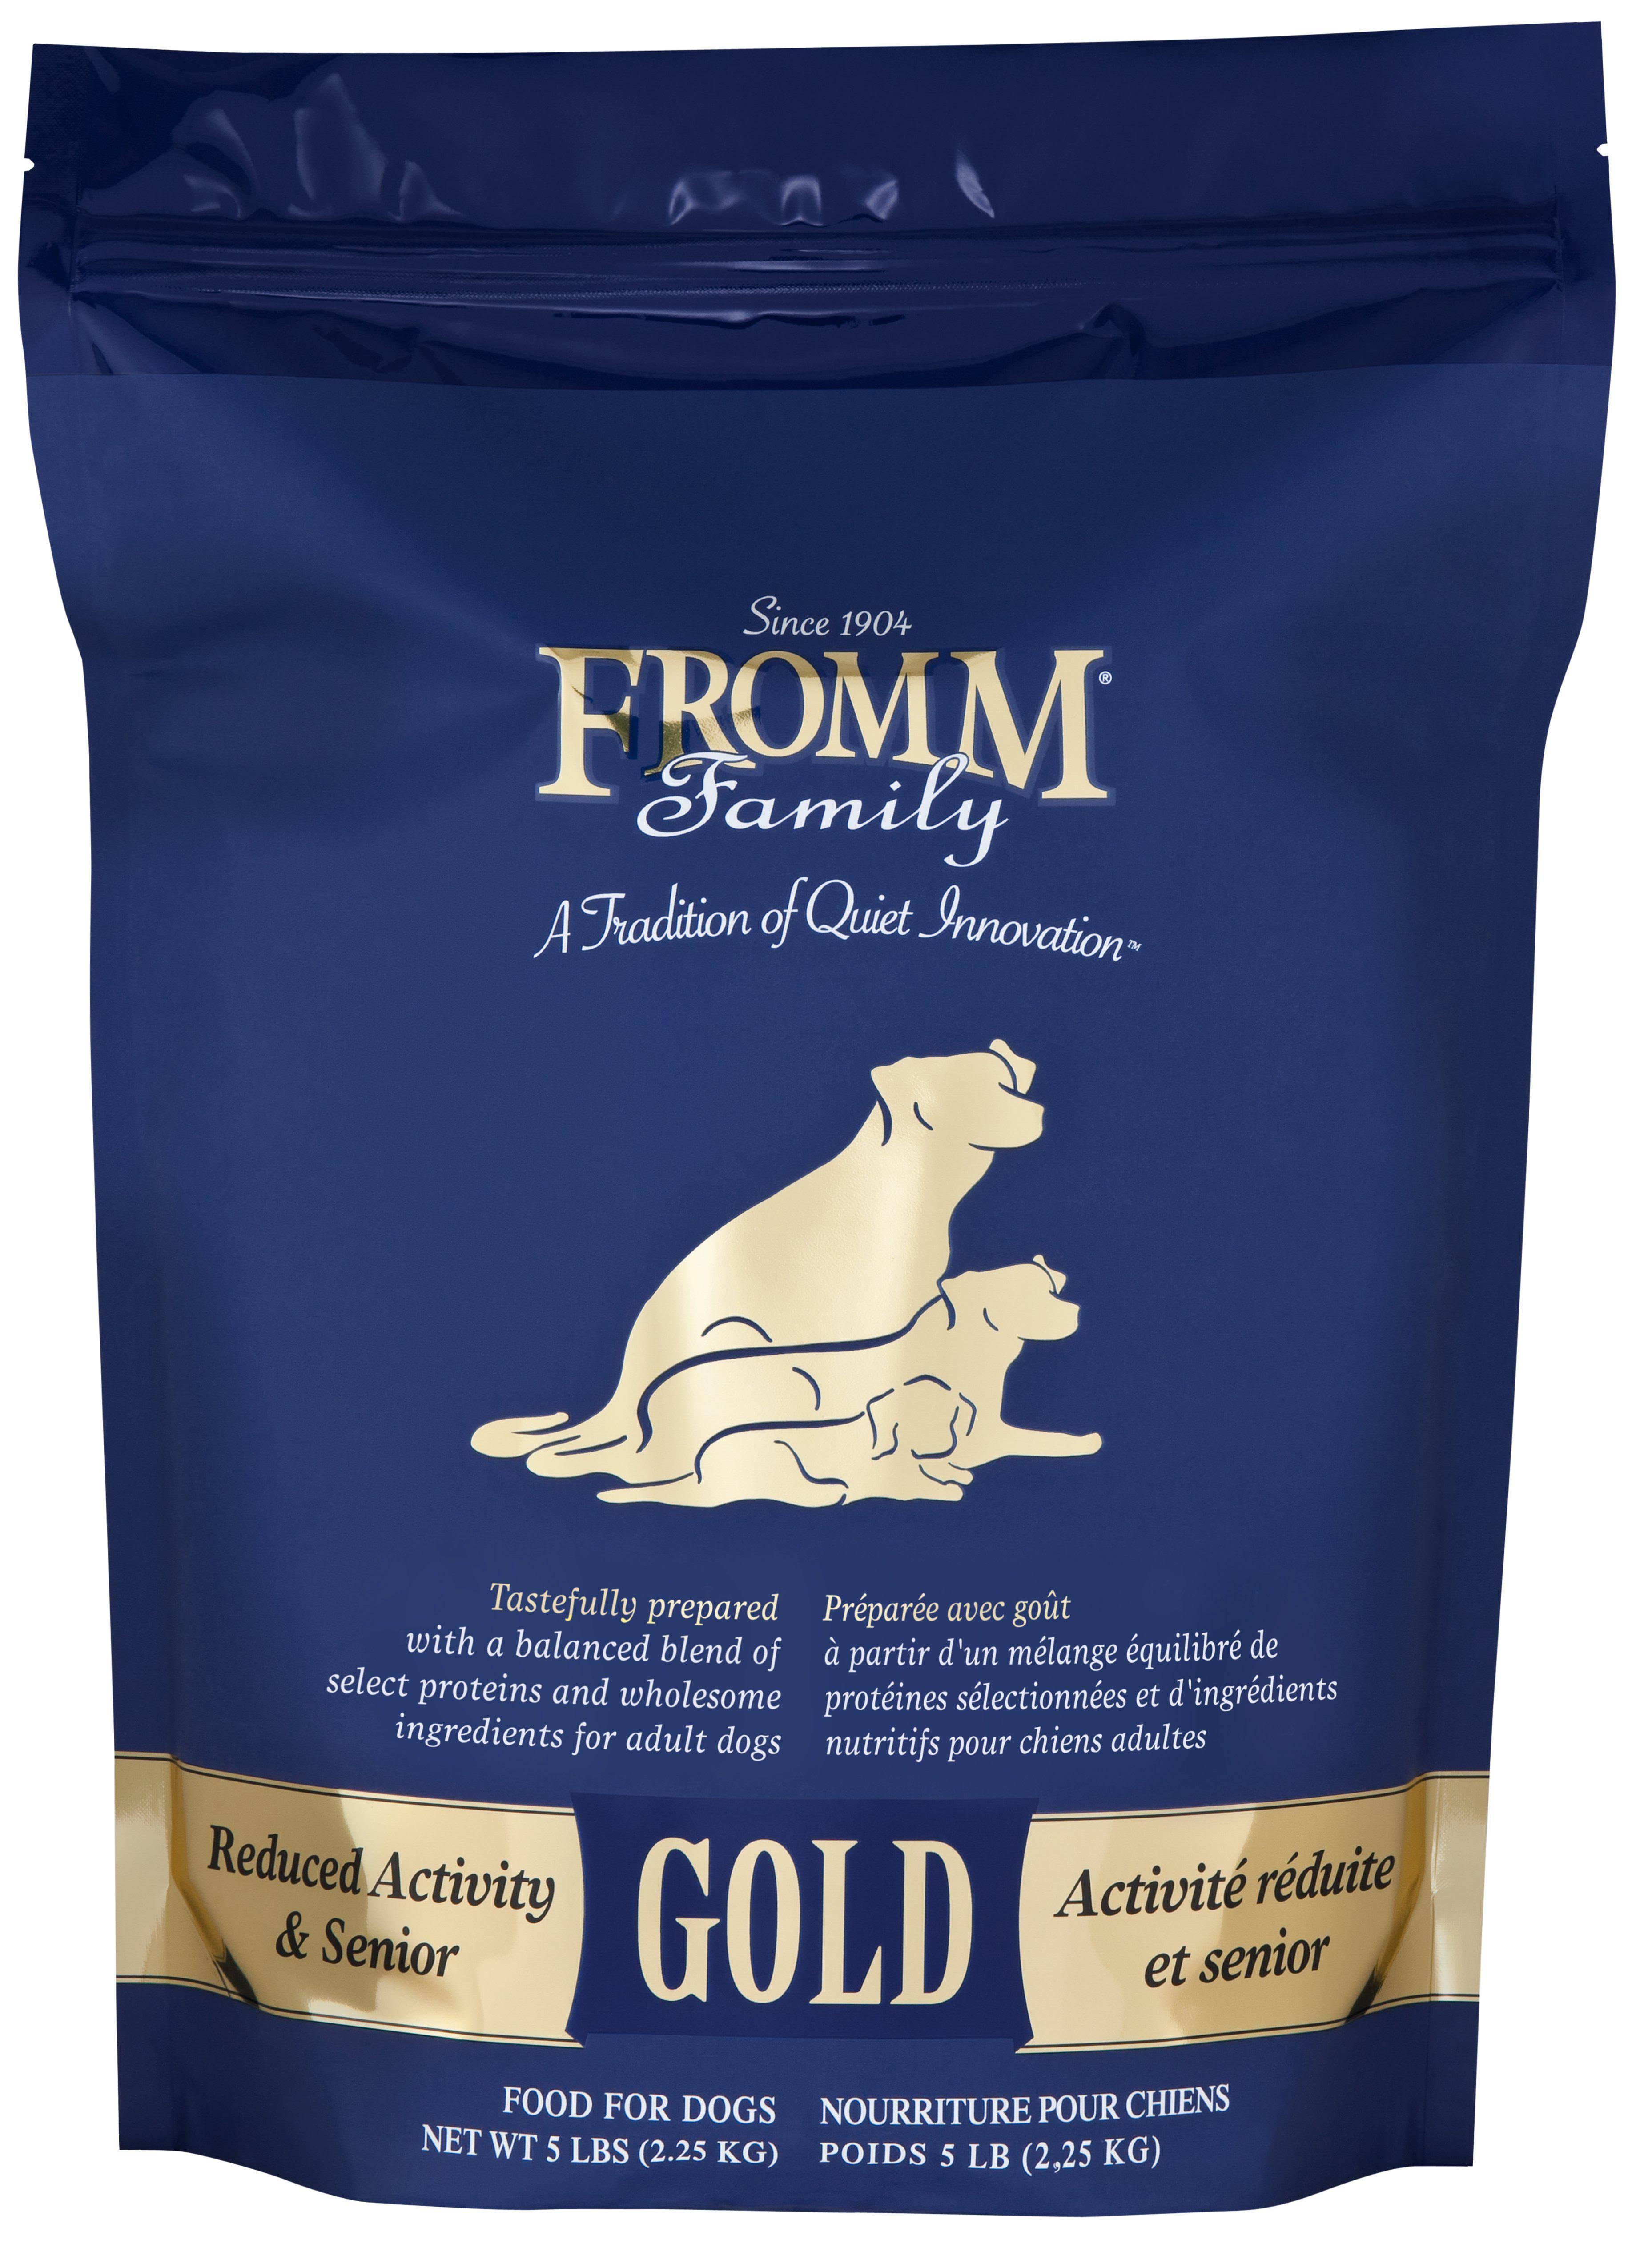 Fromm Gold Reduced Activity Senior Dog Food 5 lbs